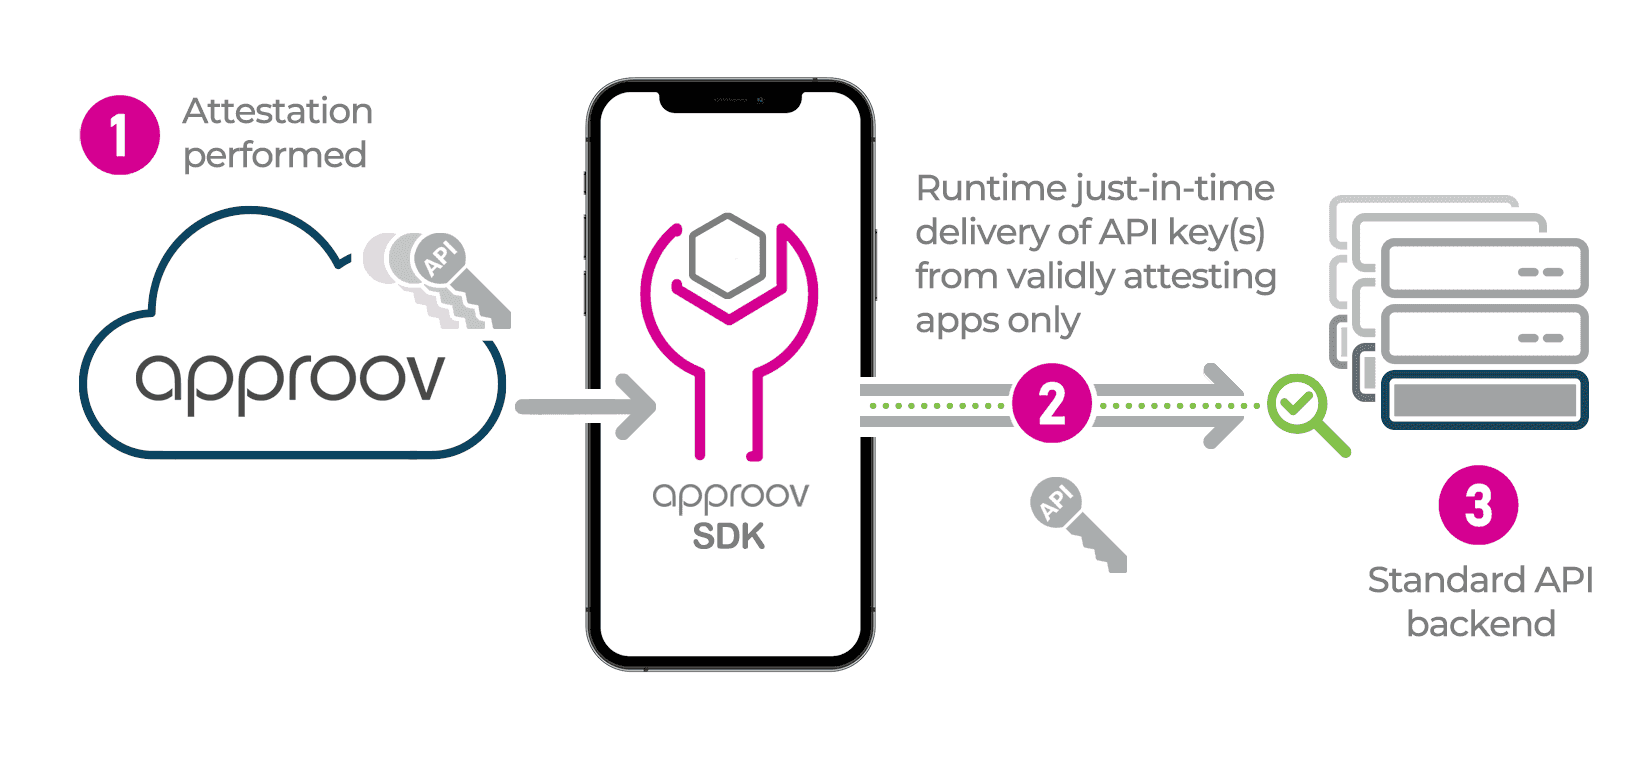 Backend protected with runtime secrets